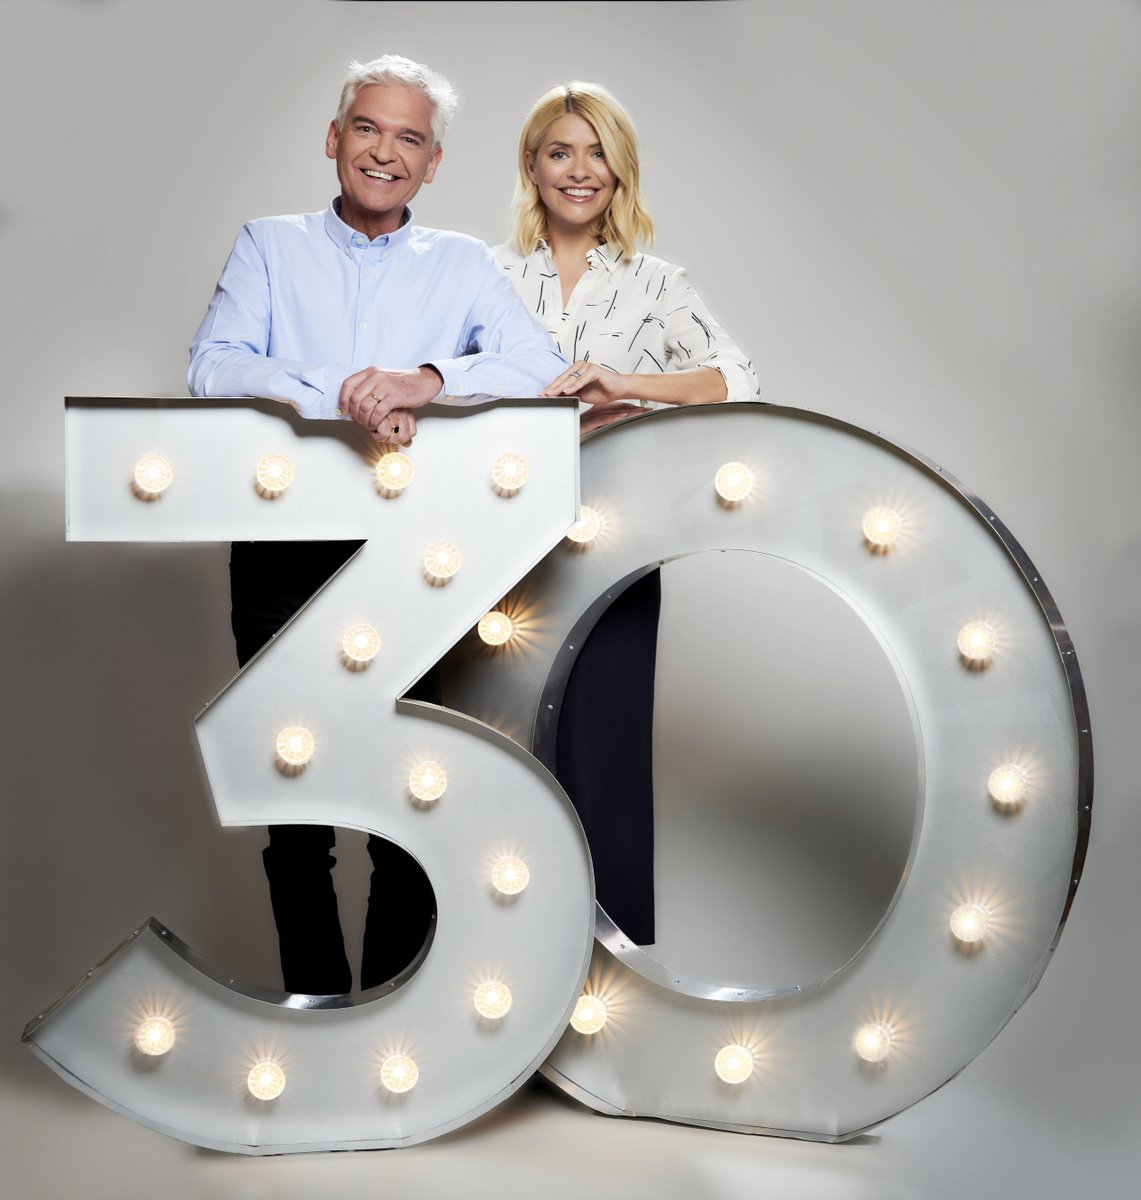 RT @ITV: Established in 1988. 
@ThisMorning - 30 Unforgettable Years. Tonight 7.30pm @ITV.
@hollywills @schofe https://t.co/bTblApE2CH